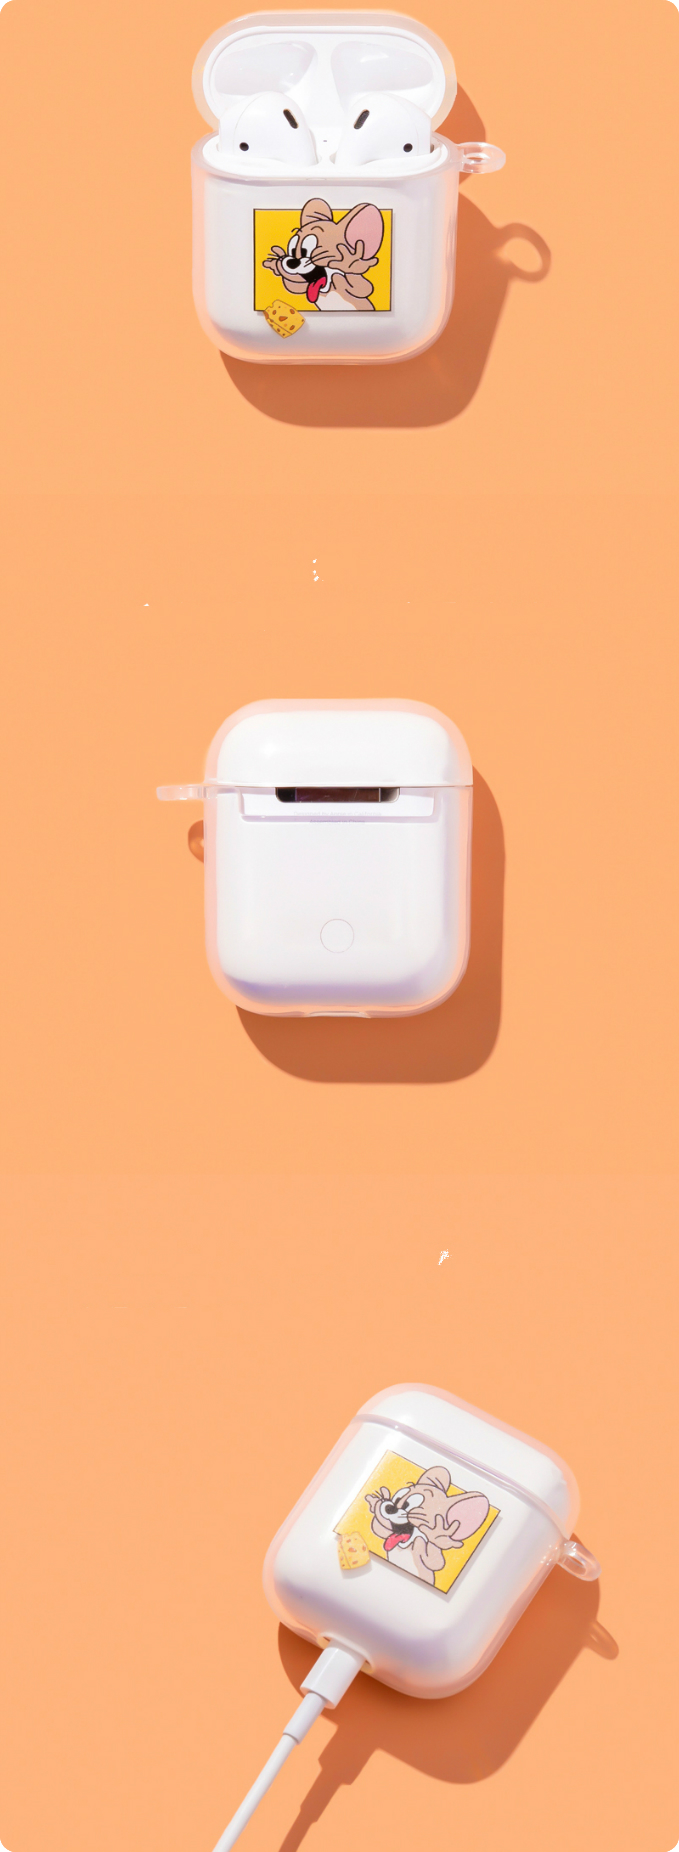 AirPods Pro カバー透明クリアねずみairpods第3世代猫エアーポッズ プロ ケース 防塵 耐衝撃